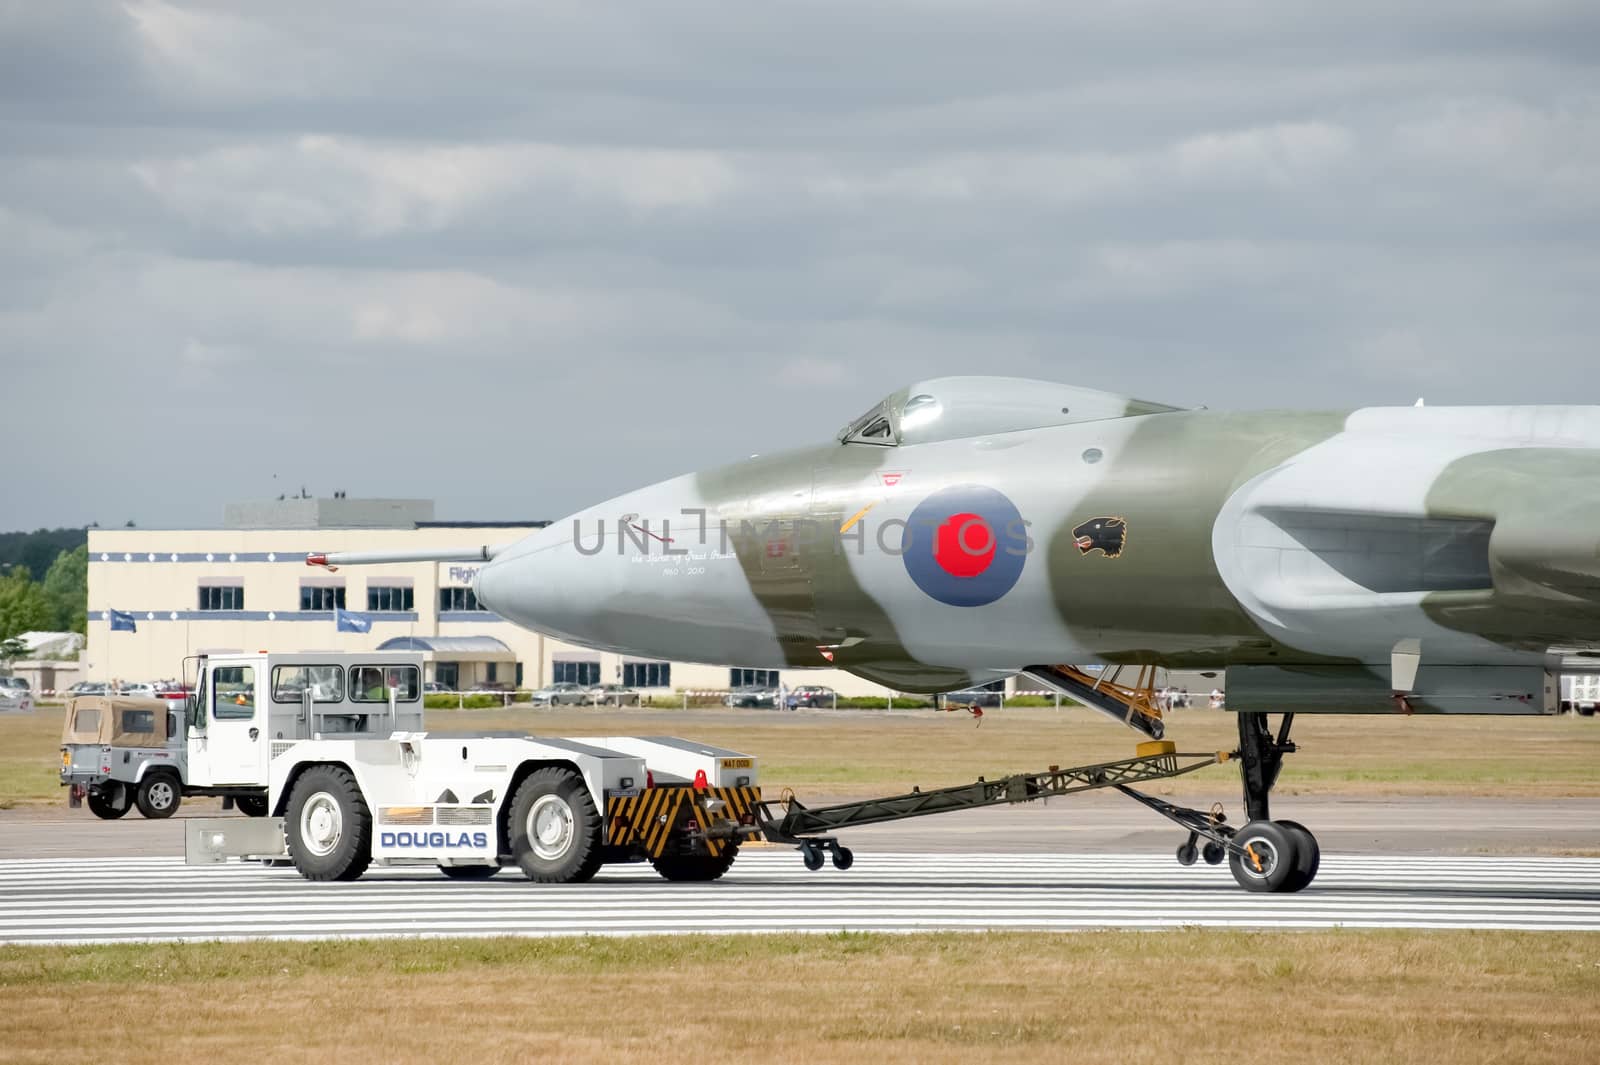 Farnborough, UK - July 24, 2010: Vulcan bomber XH558 being towed by an airfield tug truck at the Farnborough Airshow, UK